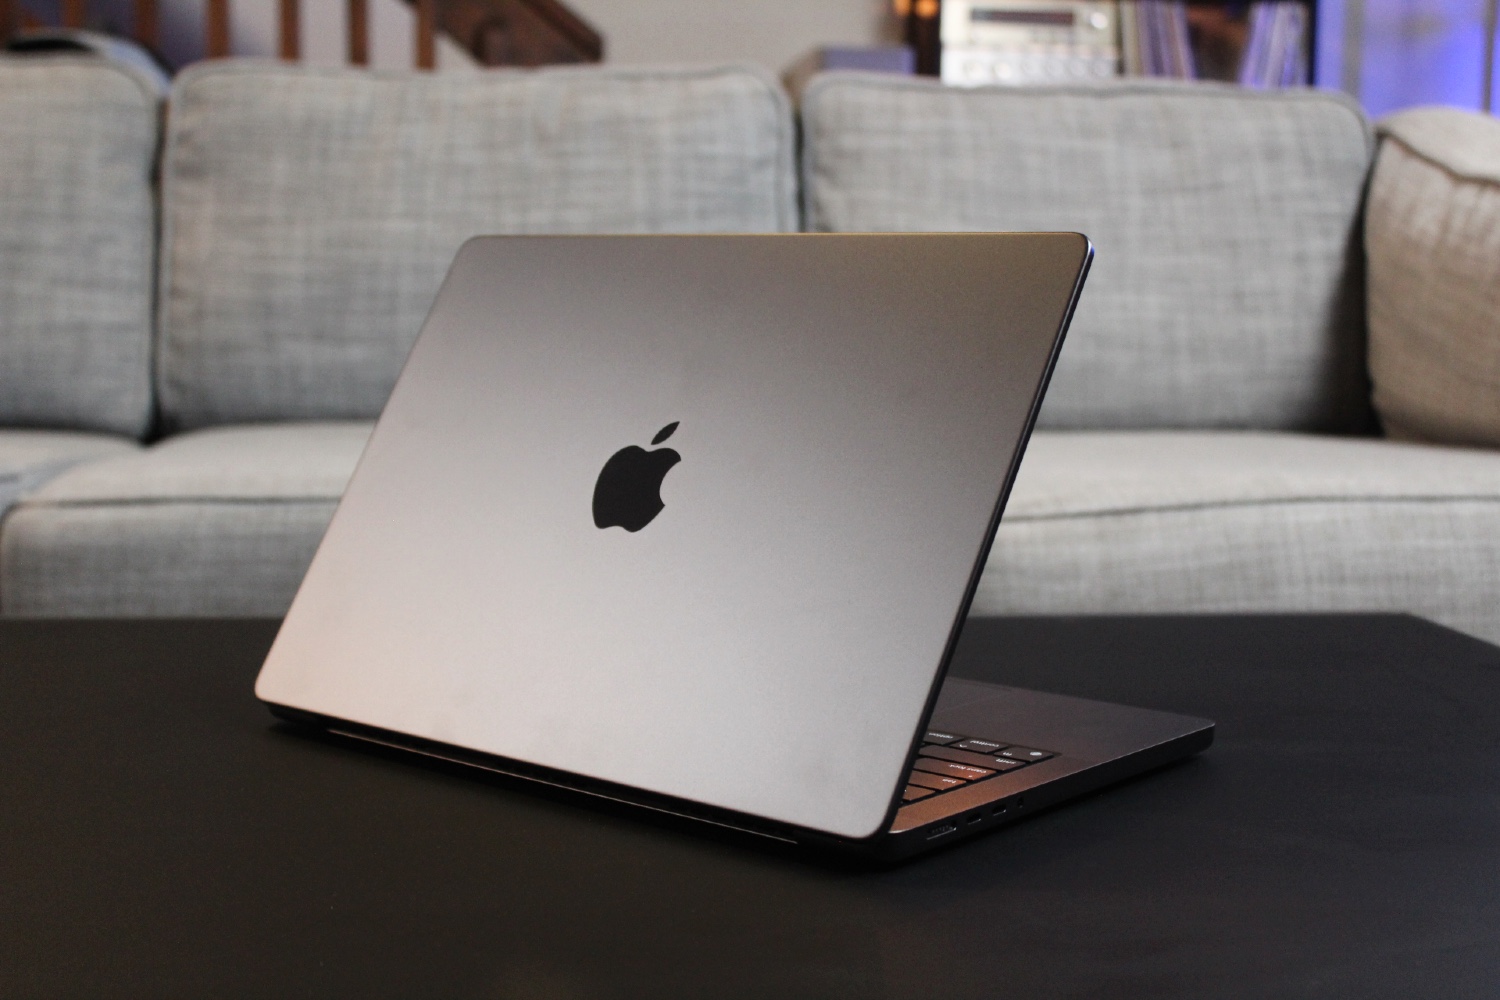 Why people are raising concerns about the M3 Pro MacBook Pro